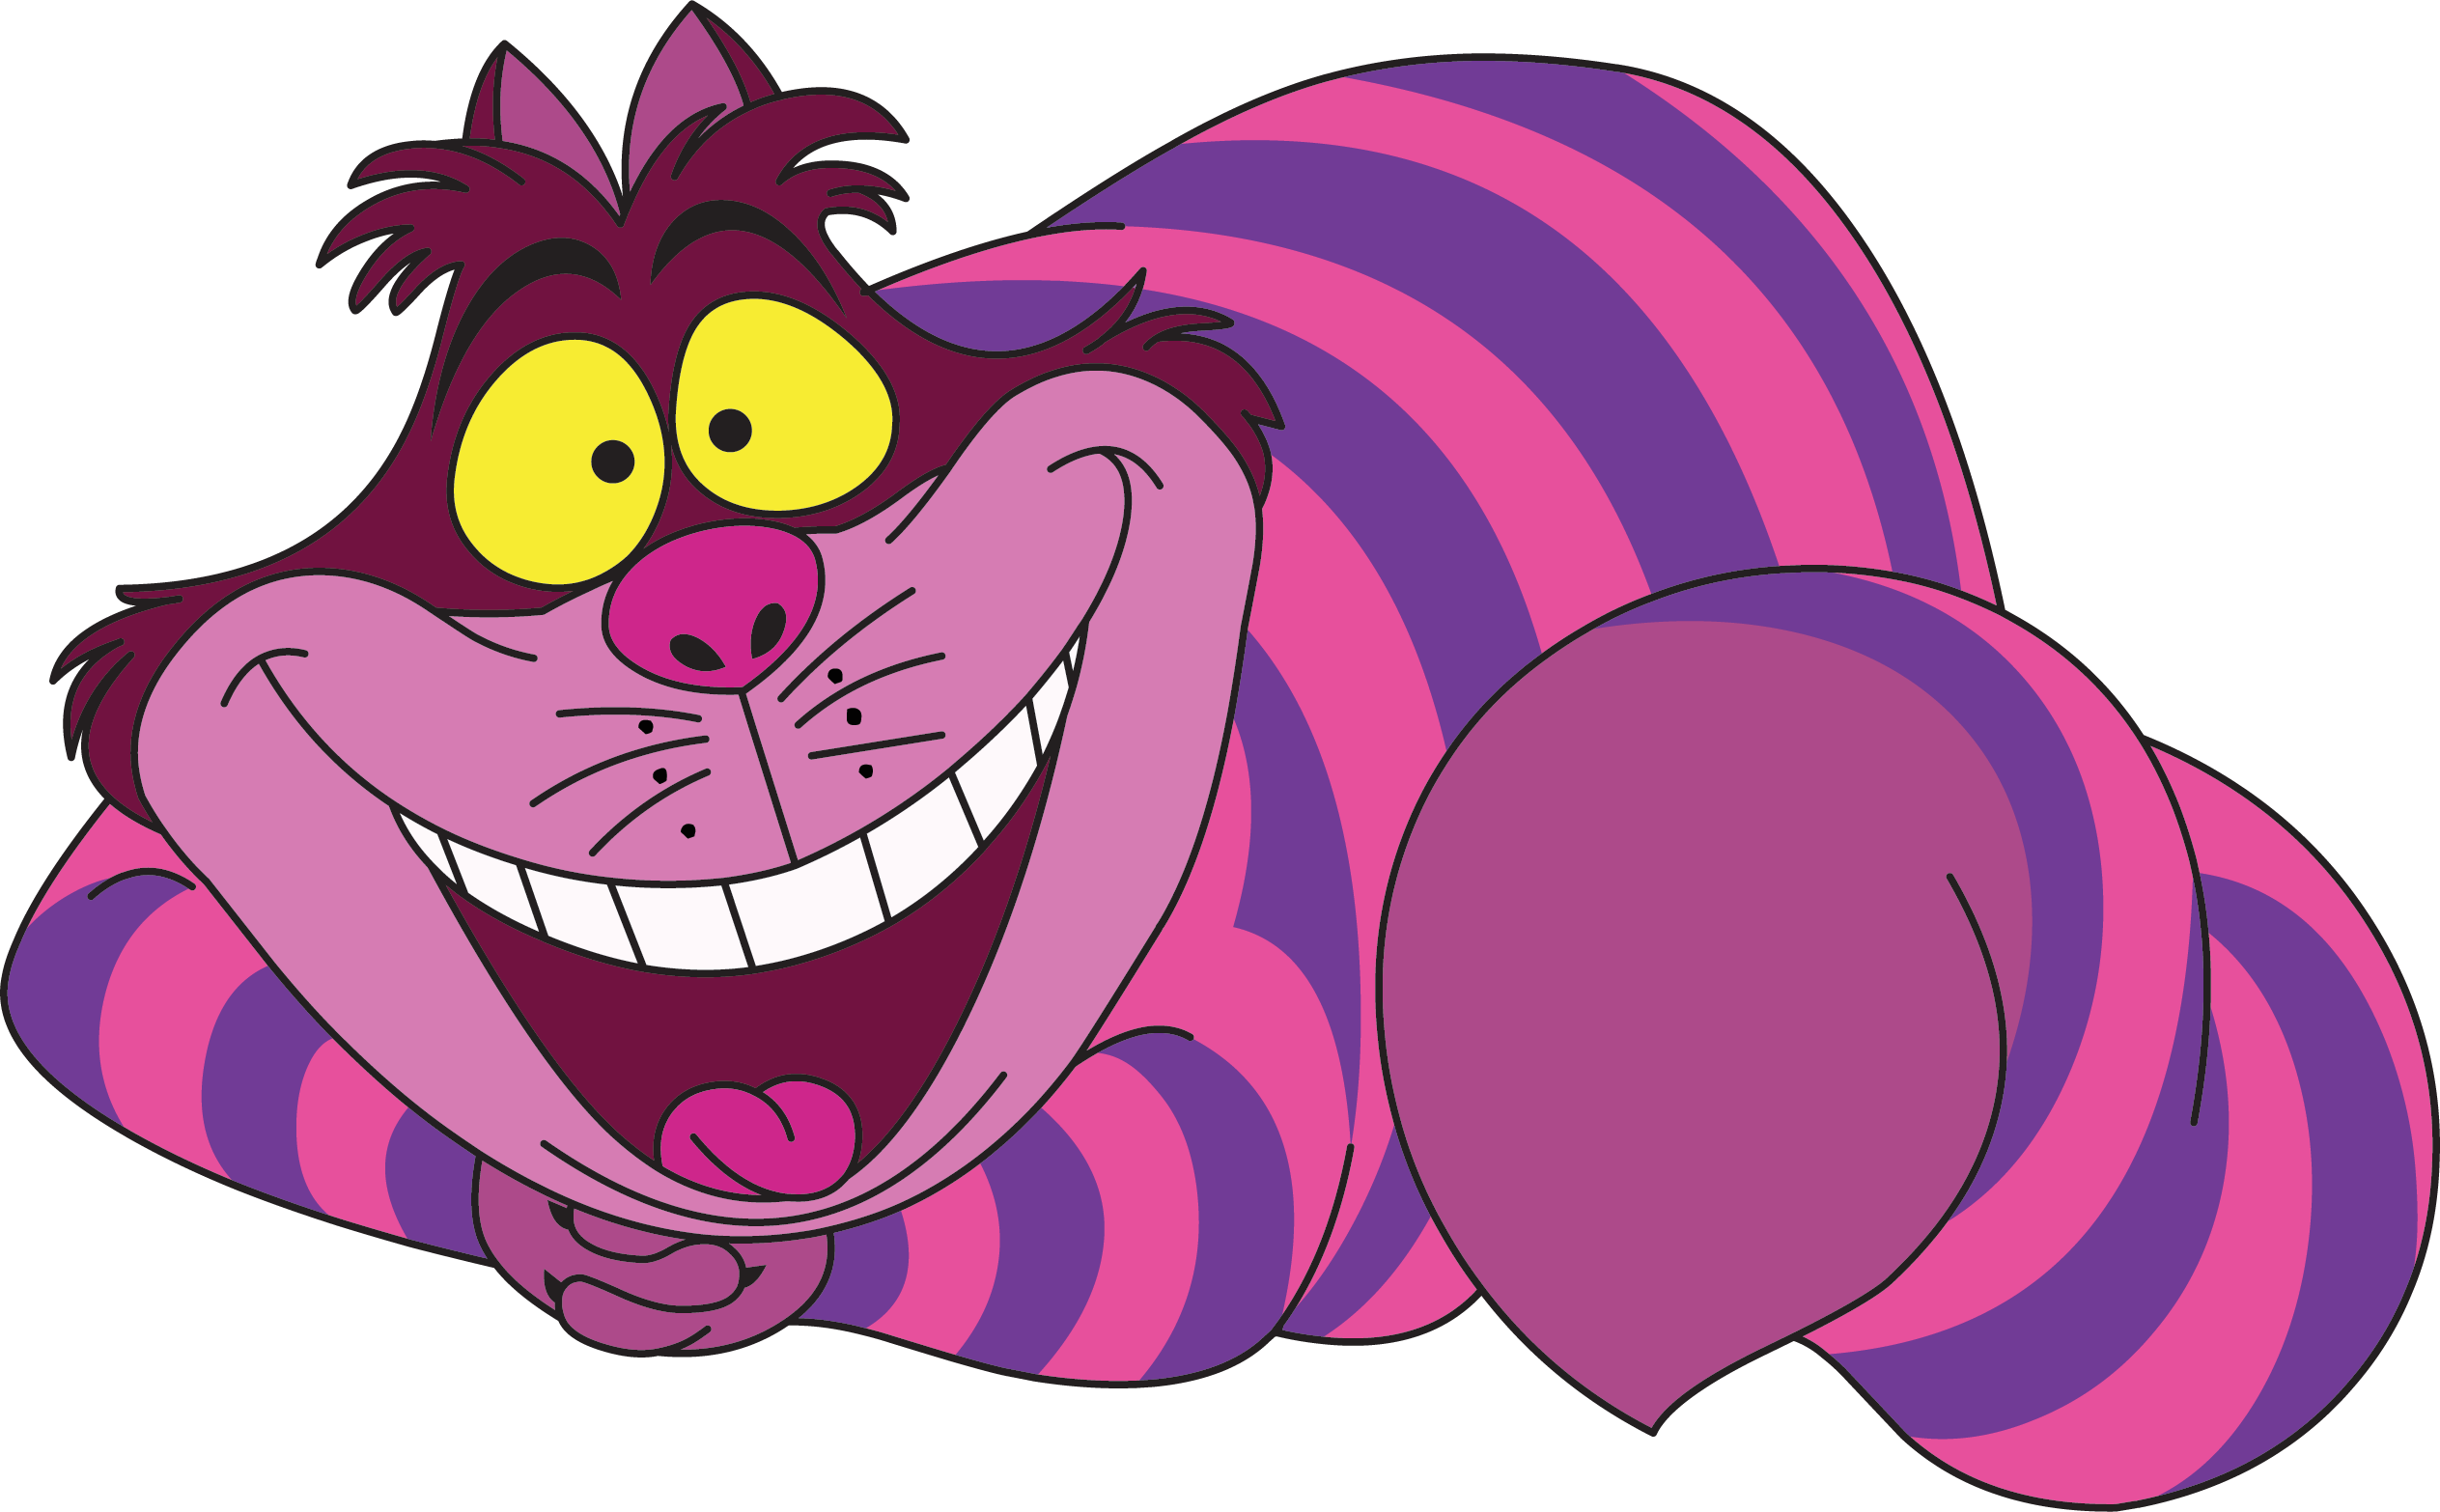 Cheshire Cat svg #6, Download drawings